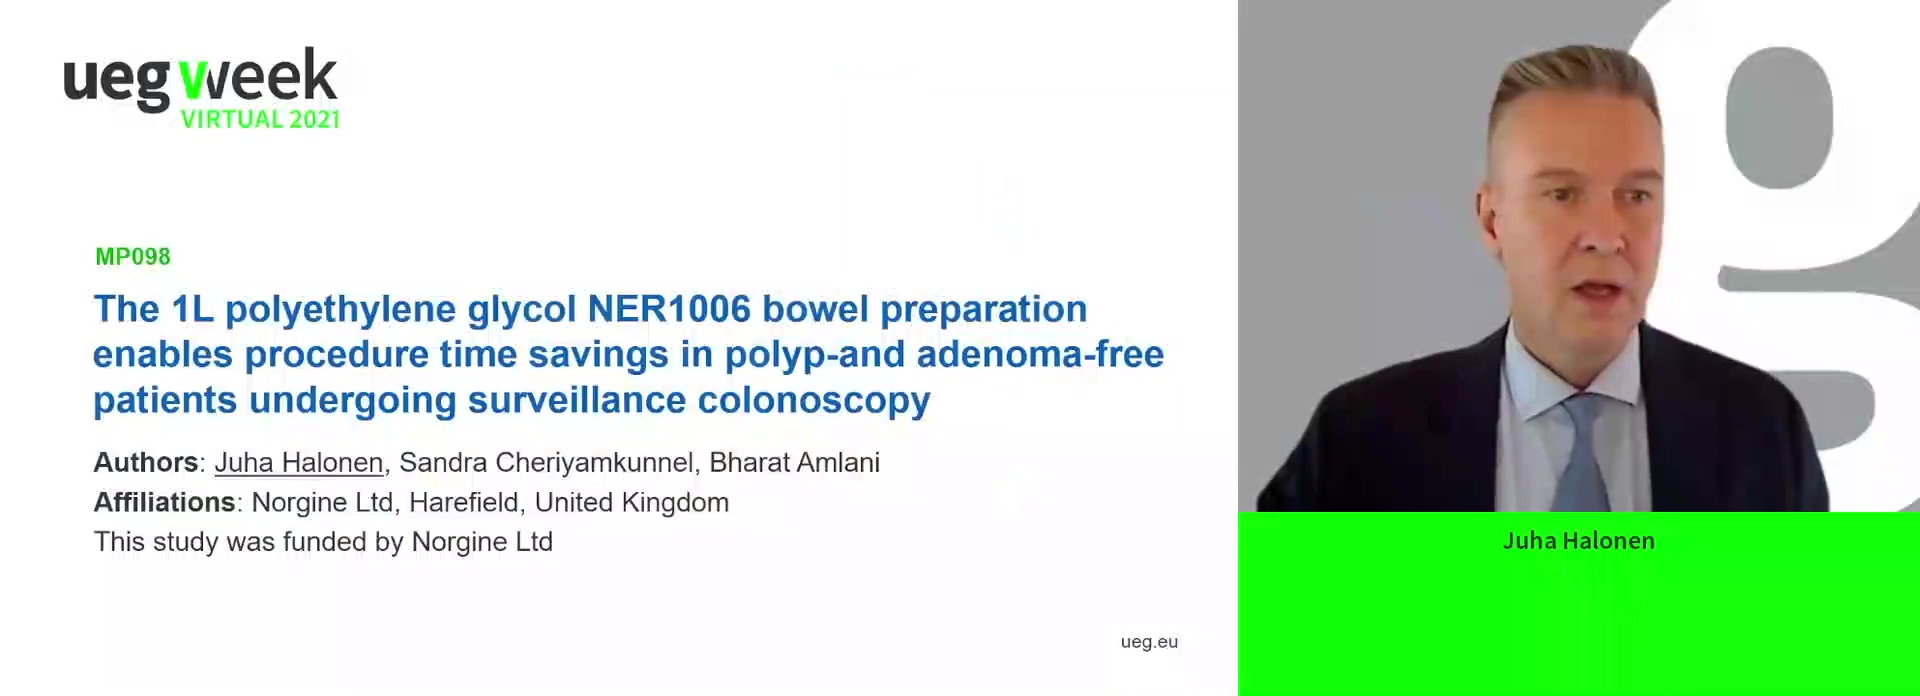 THE 1L POLYETHYLENE GLYCOL NER1006 BOWEL PREPARATION ENABLES PROCEDURE TIME SAVINGS IN POLYP- AND ADENOMA-FREE PATIENTS UNDERGOING SURVEILLANCE COLONOSCOPY